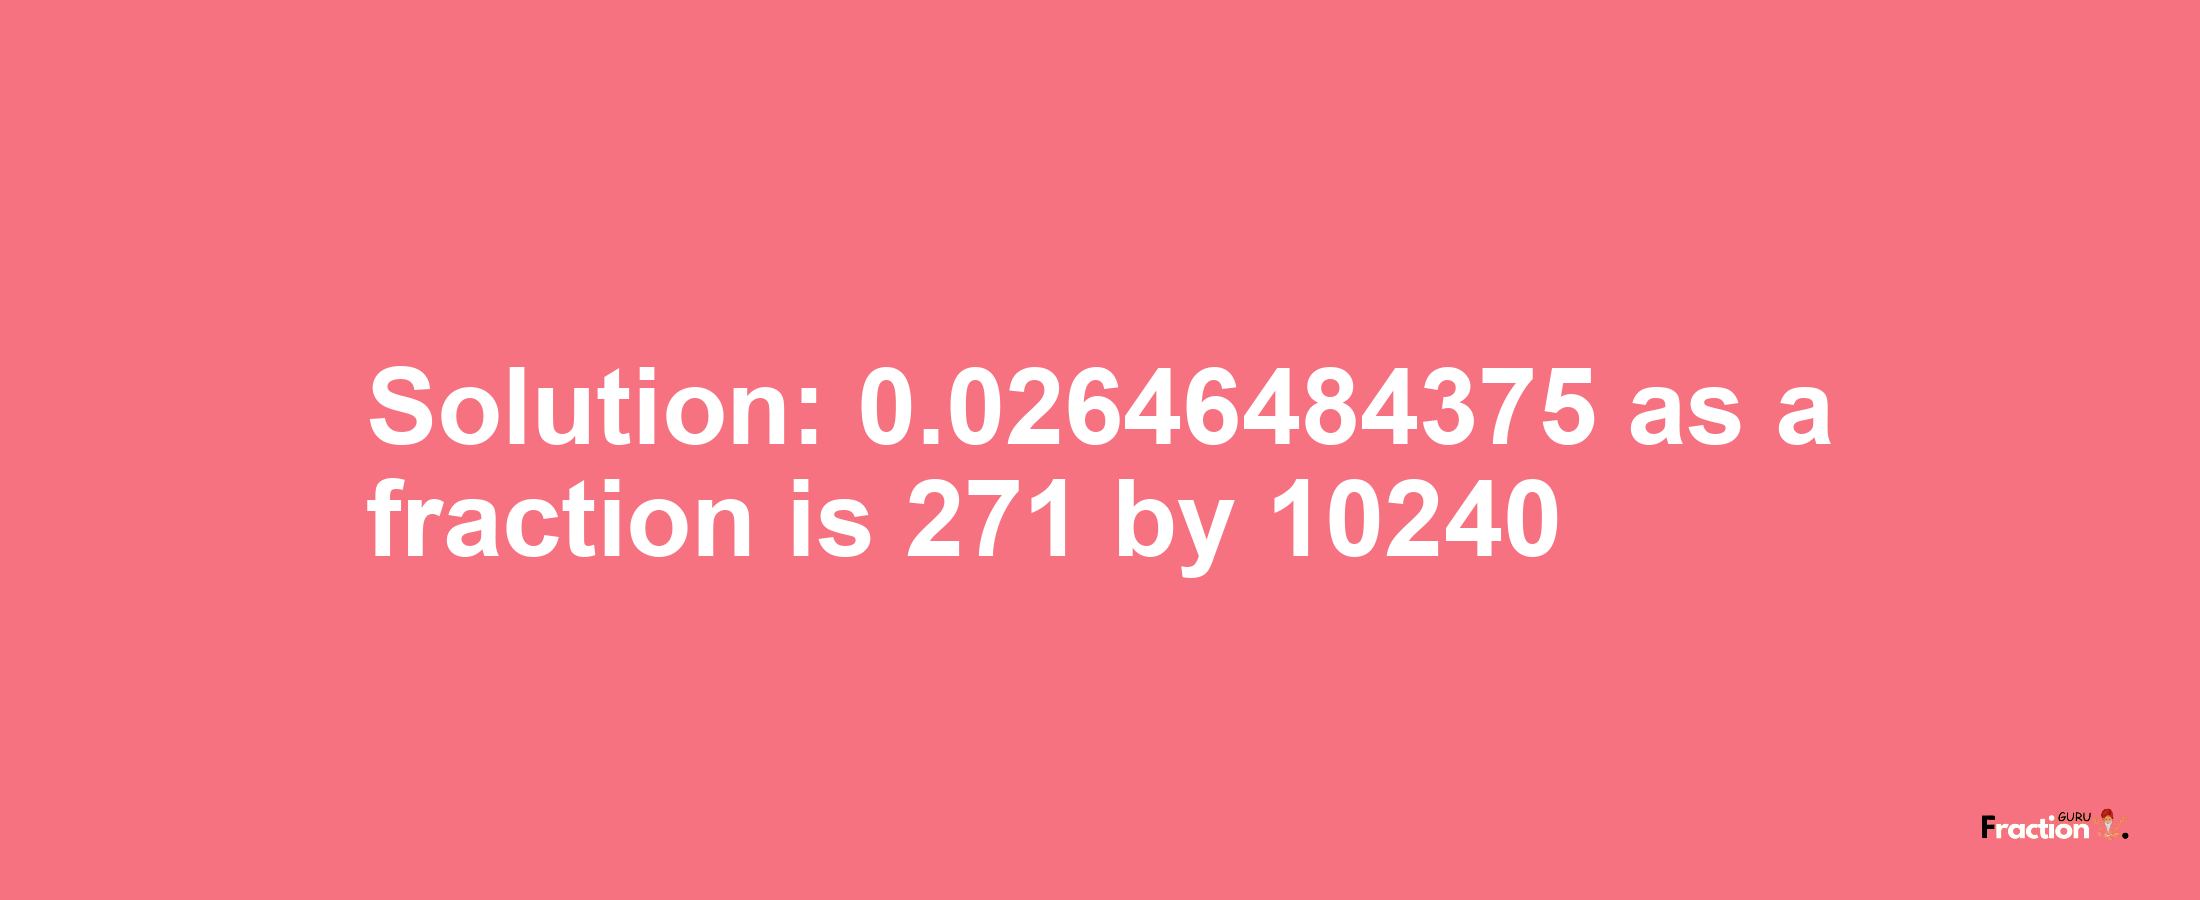 Solution:0.02646484375 as a fraction is 271/10240